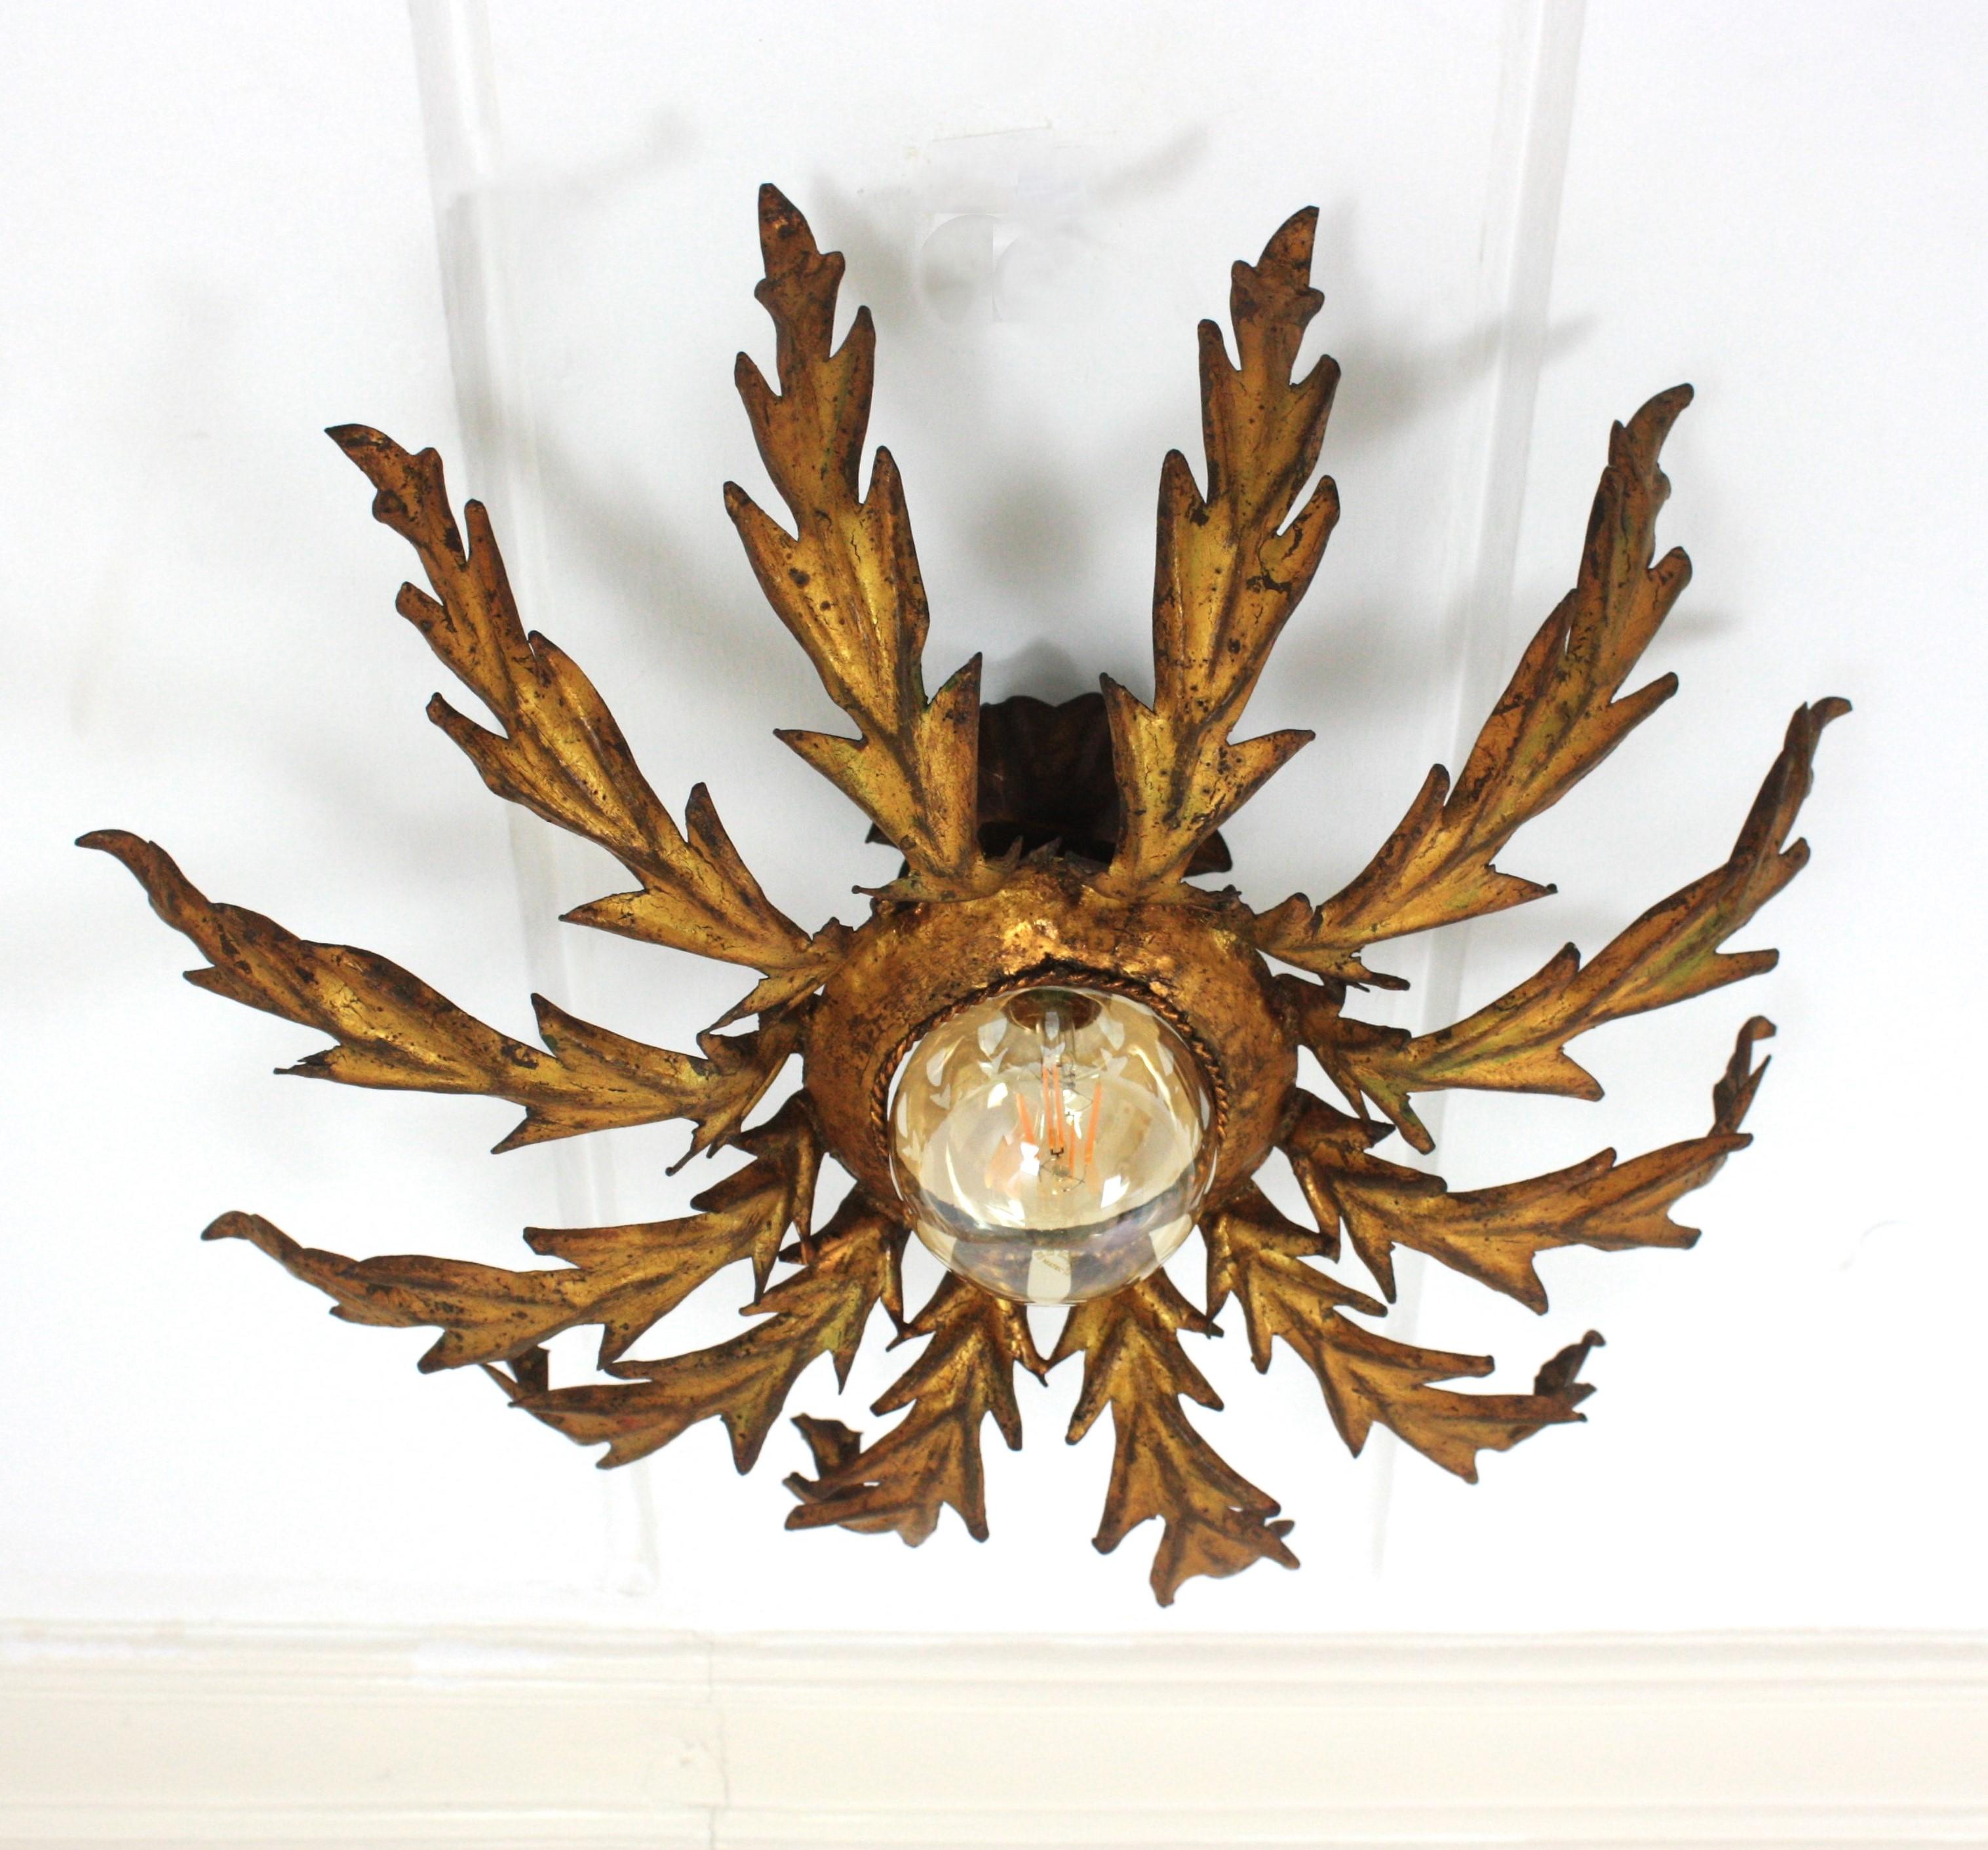 Hand-Crafted French Sunburst Leafed Ceiling Light Fixture in Gilt Iron, 1940s For Sale